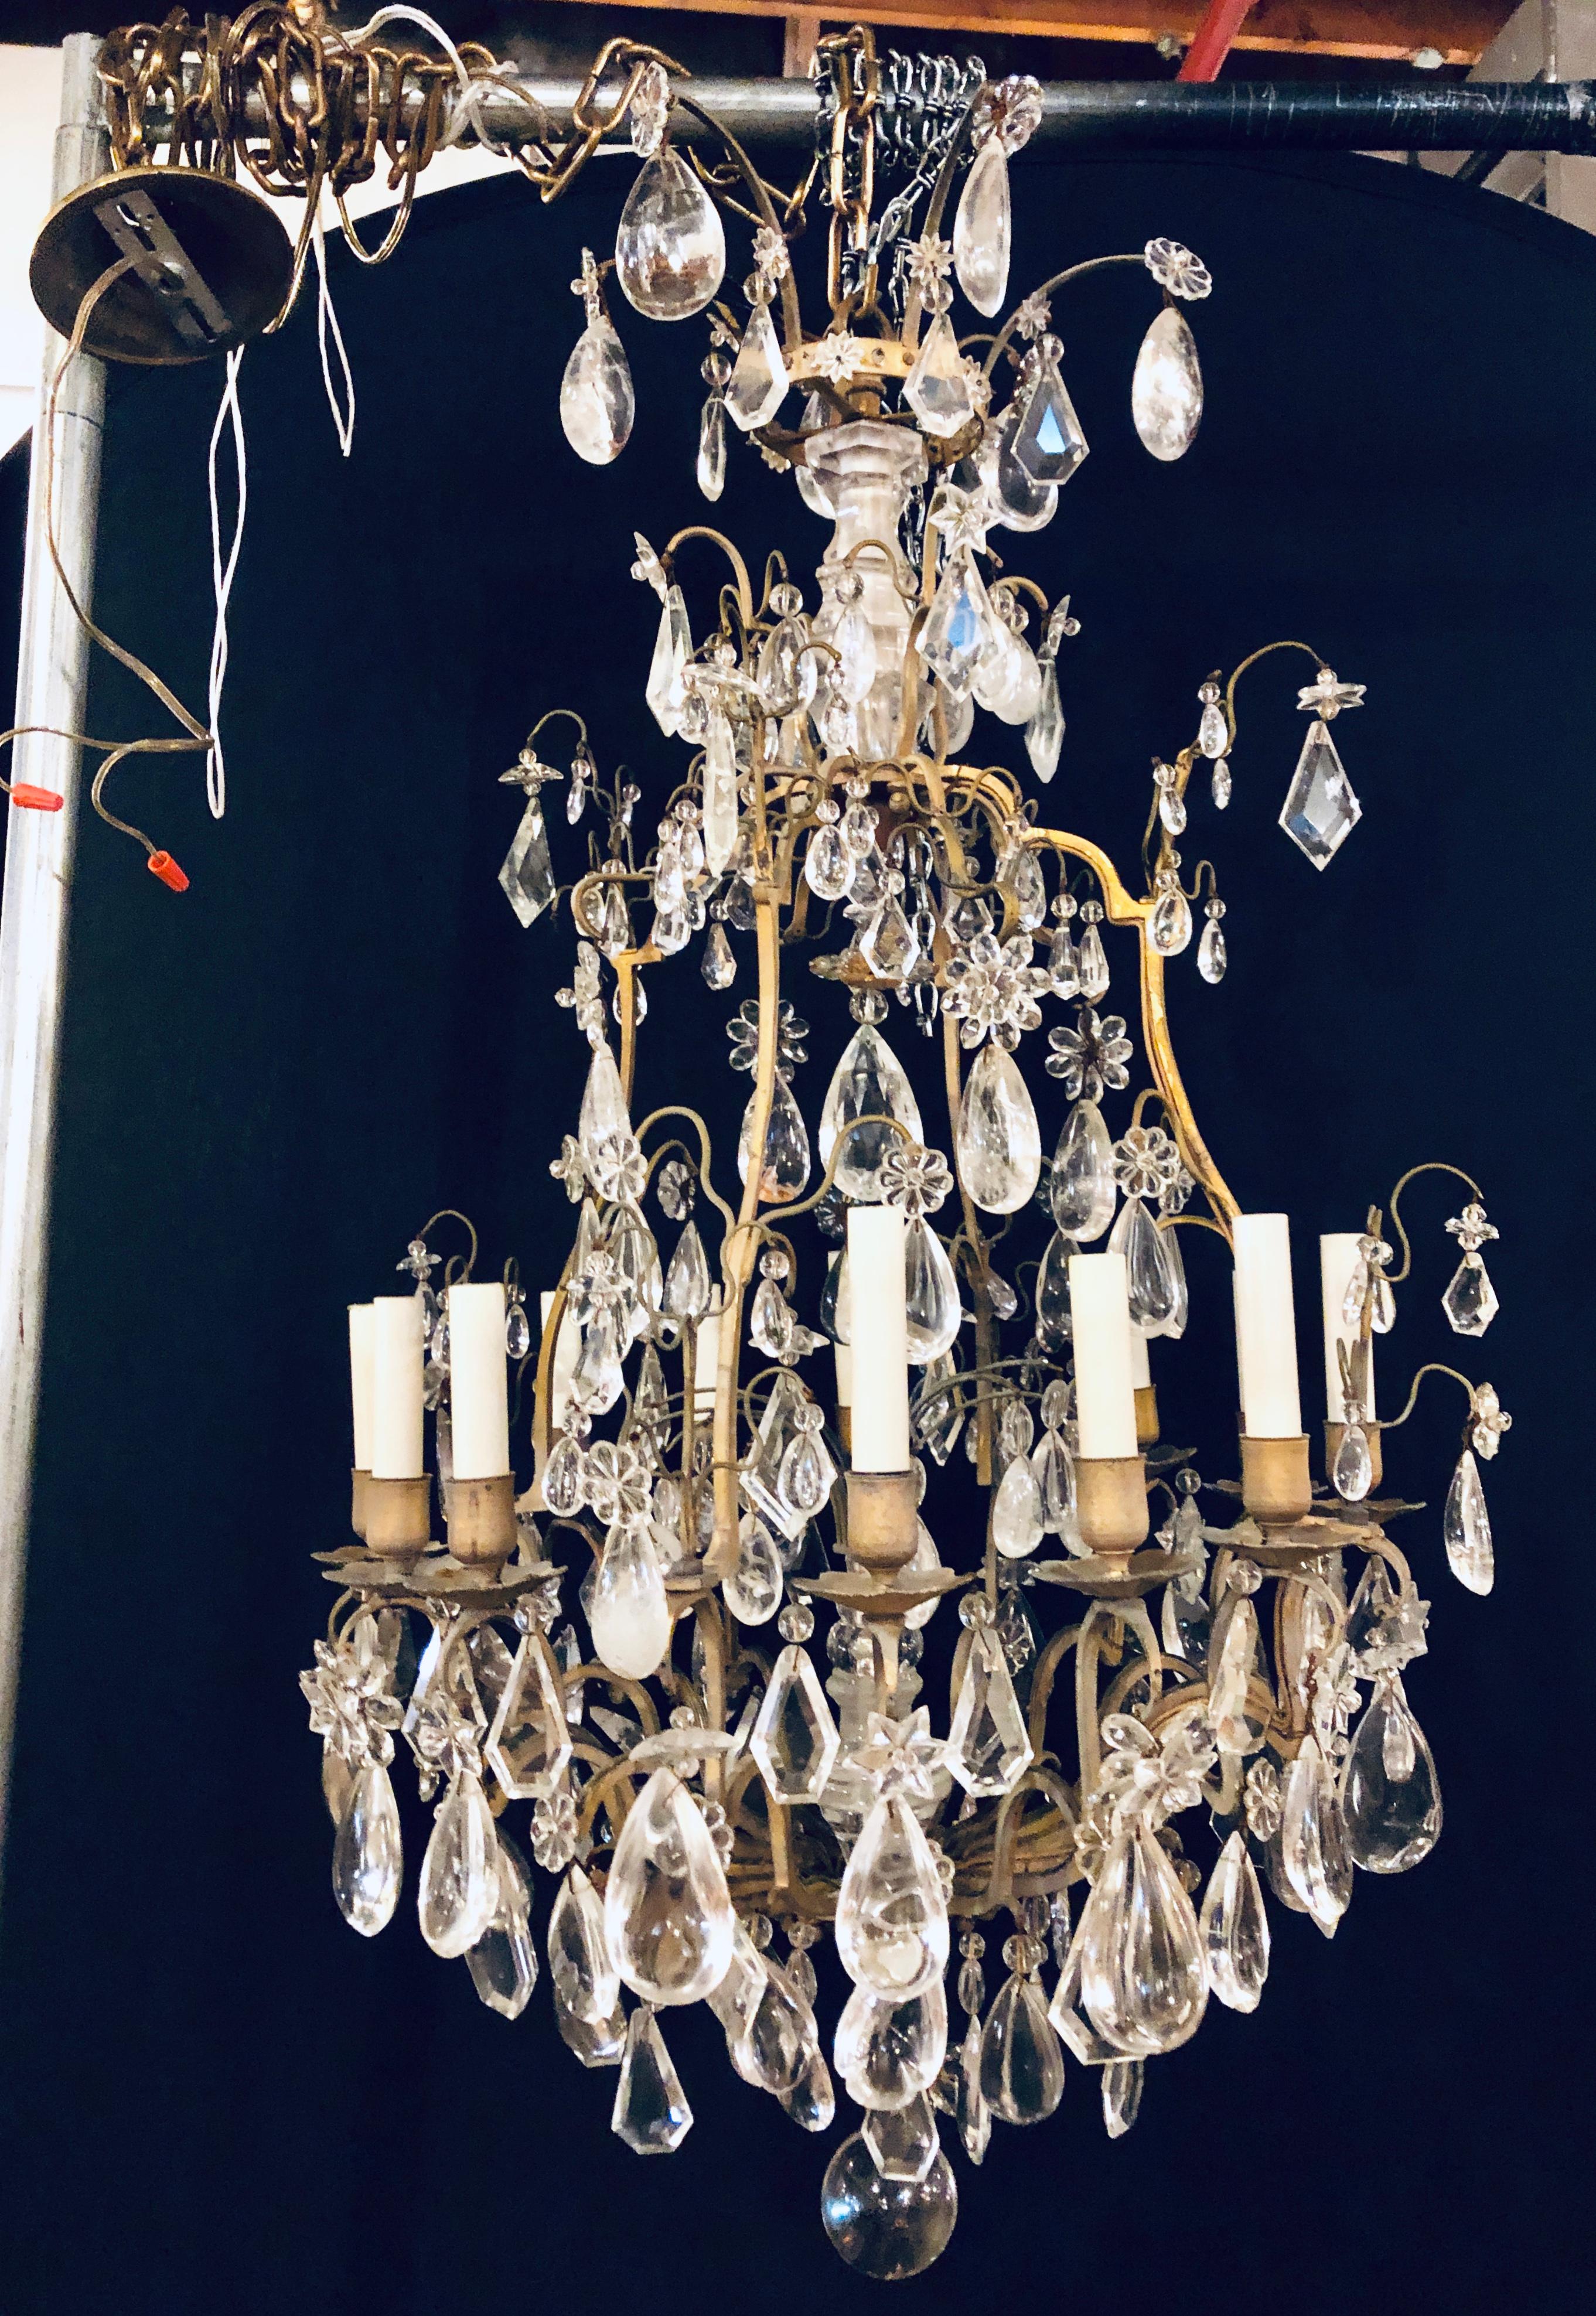 Fine 19th-20th century Louis XVI style 12 light bronze and rock crystal chandelier. Spectacular in a word. This Fine chandelier has recently been removed from a New Cannan Ct Mansion. The bronze frame having one dozen lights with two rock crystal